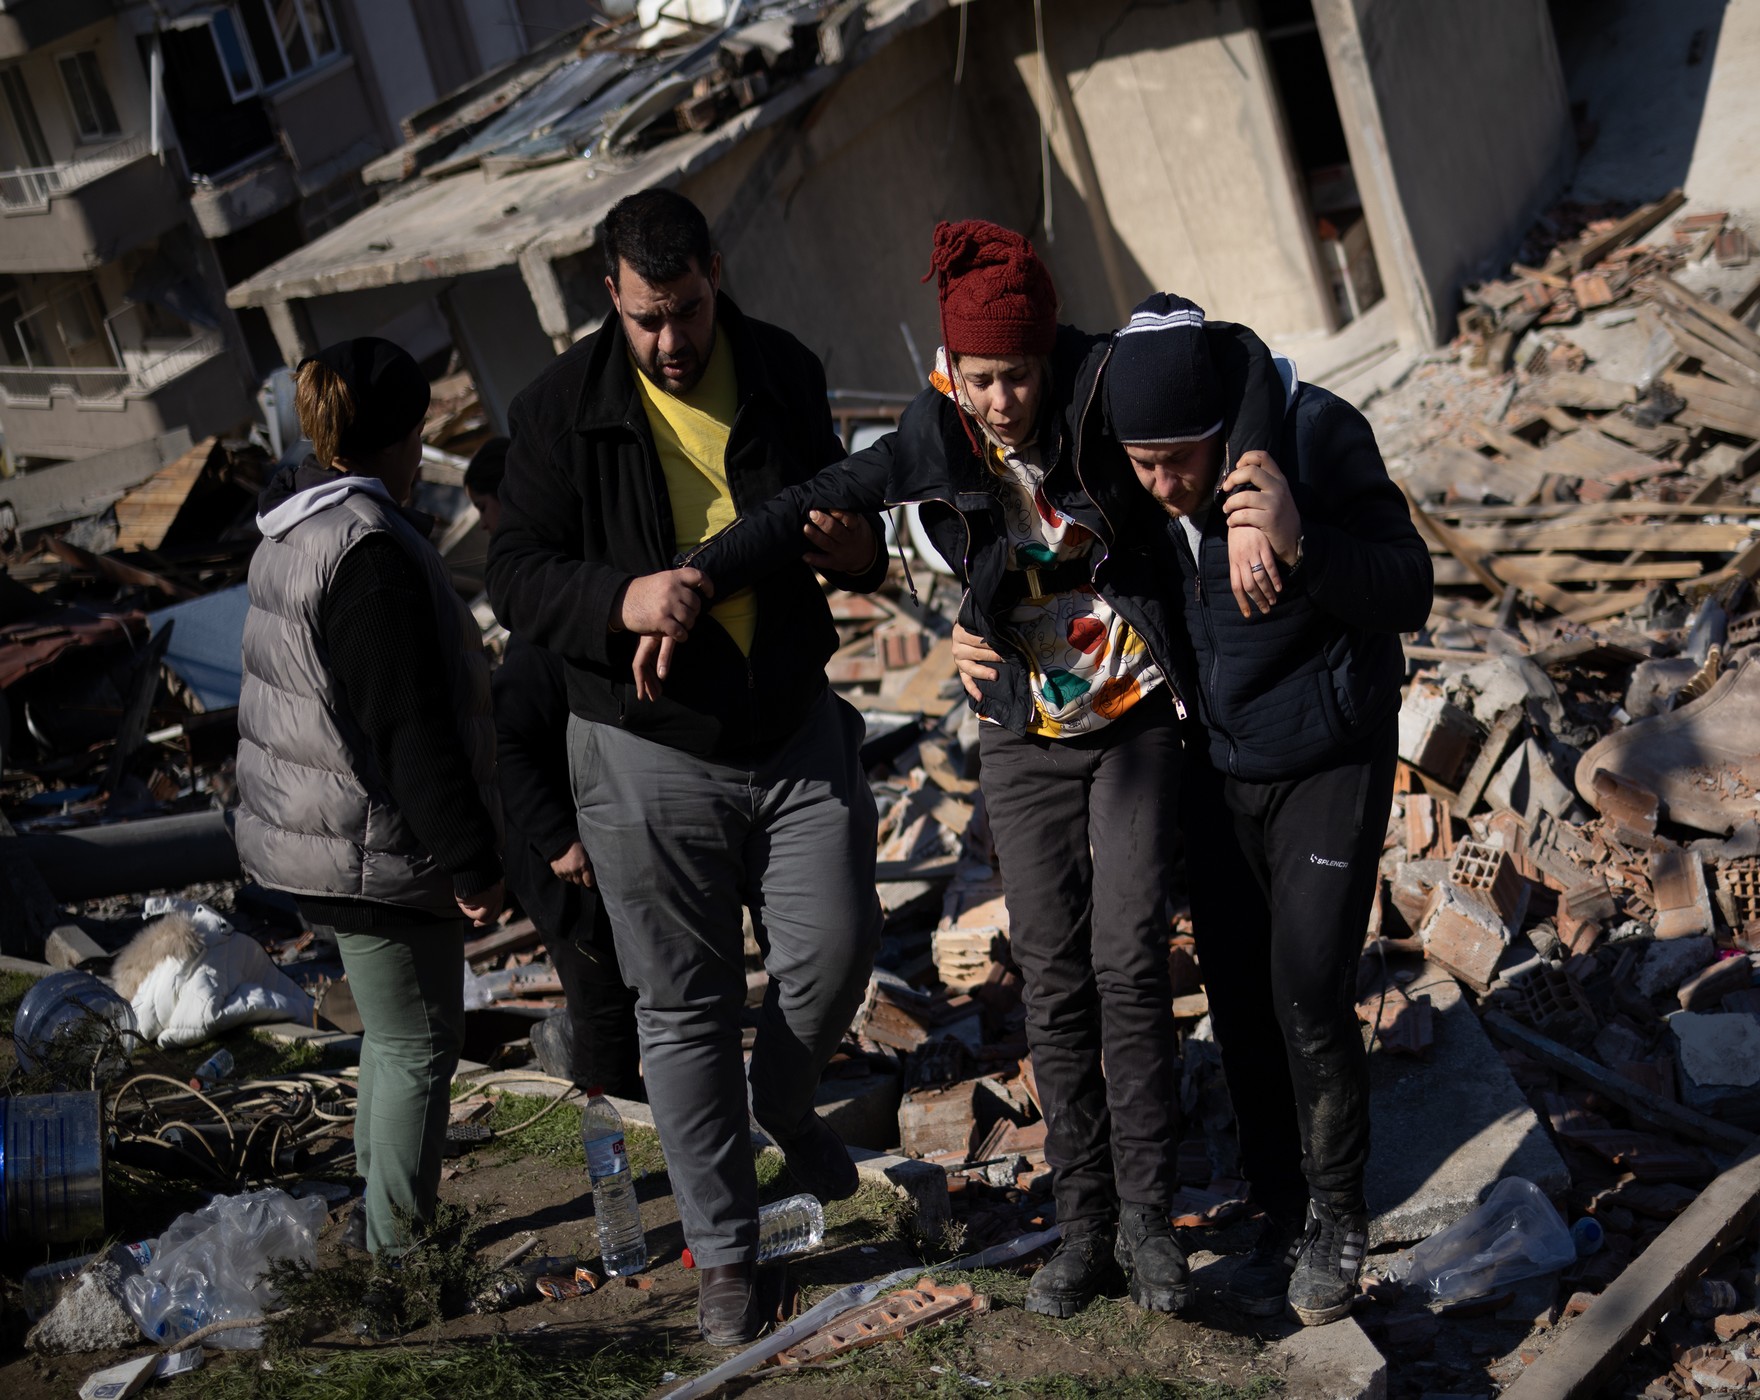 Emergency search and rescue crews search through the rubble of destroyed buildings in Hatay, Antakya, Turkey, caused by the recent earthquakes.